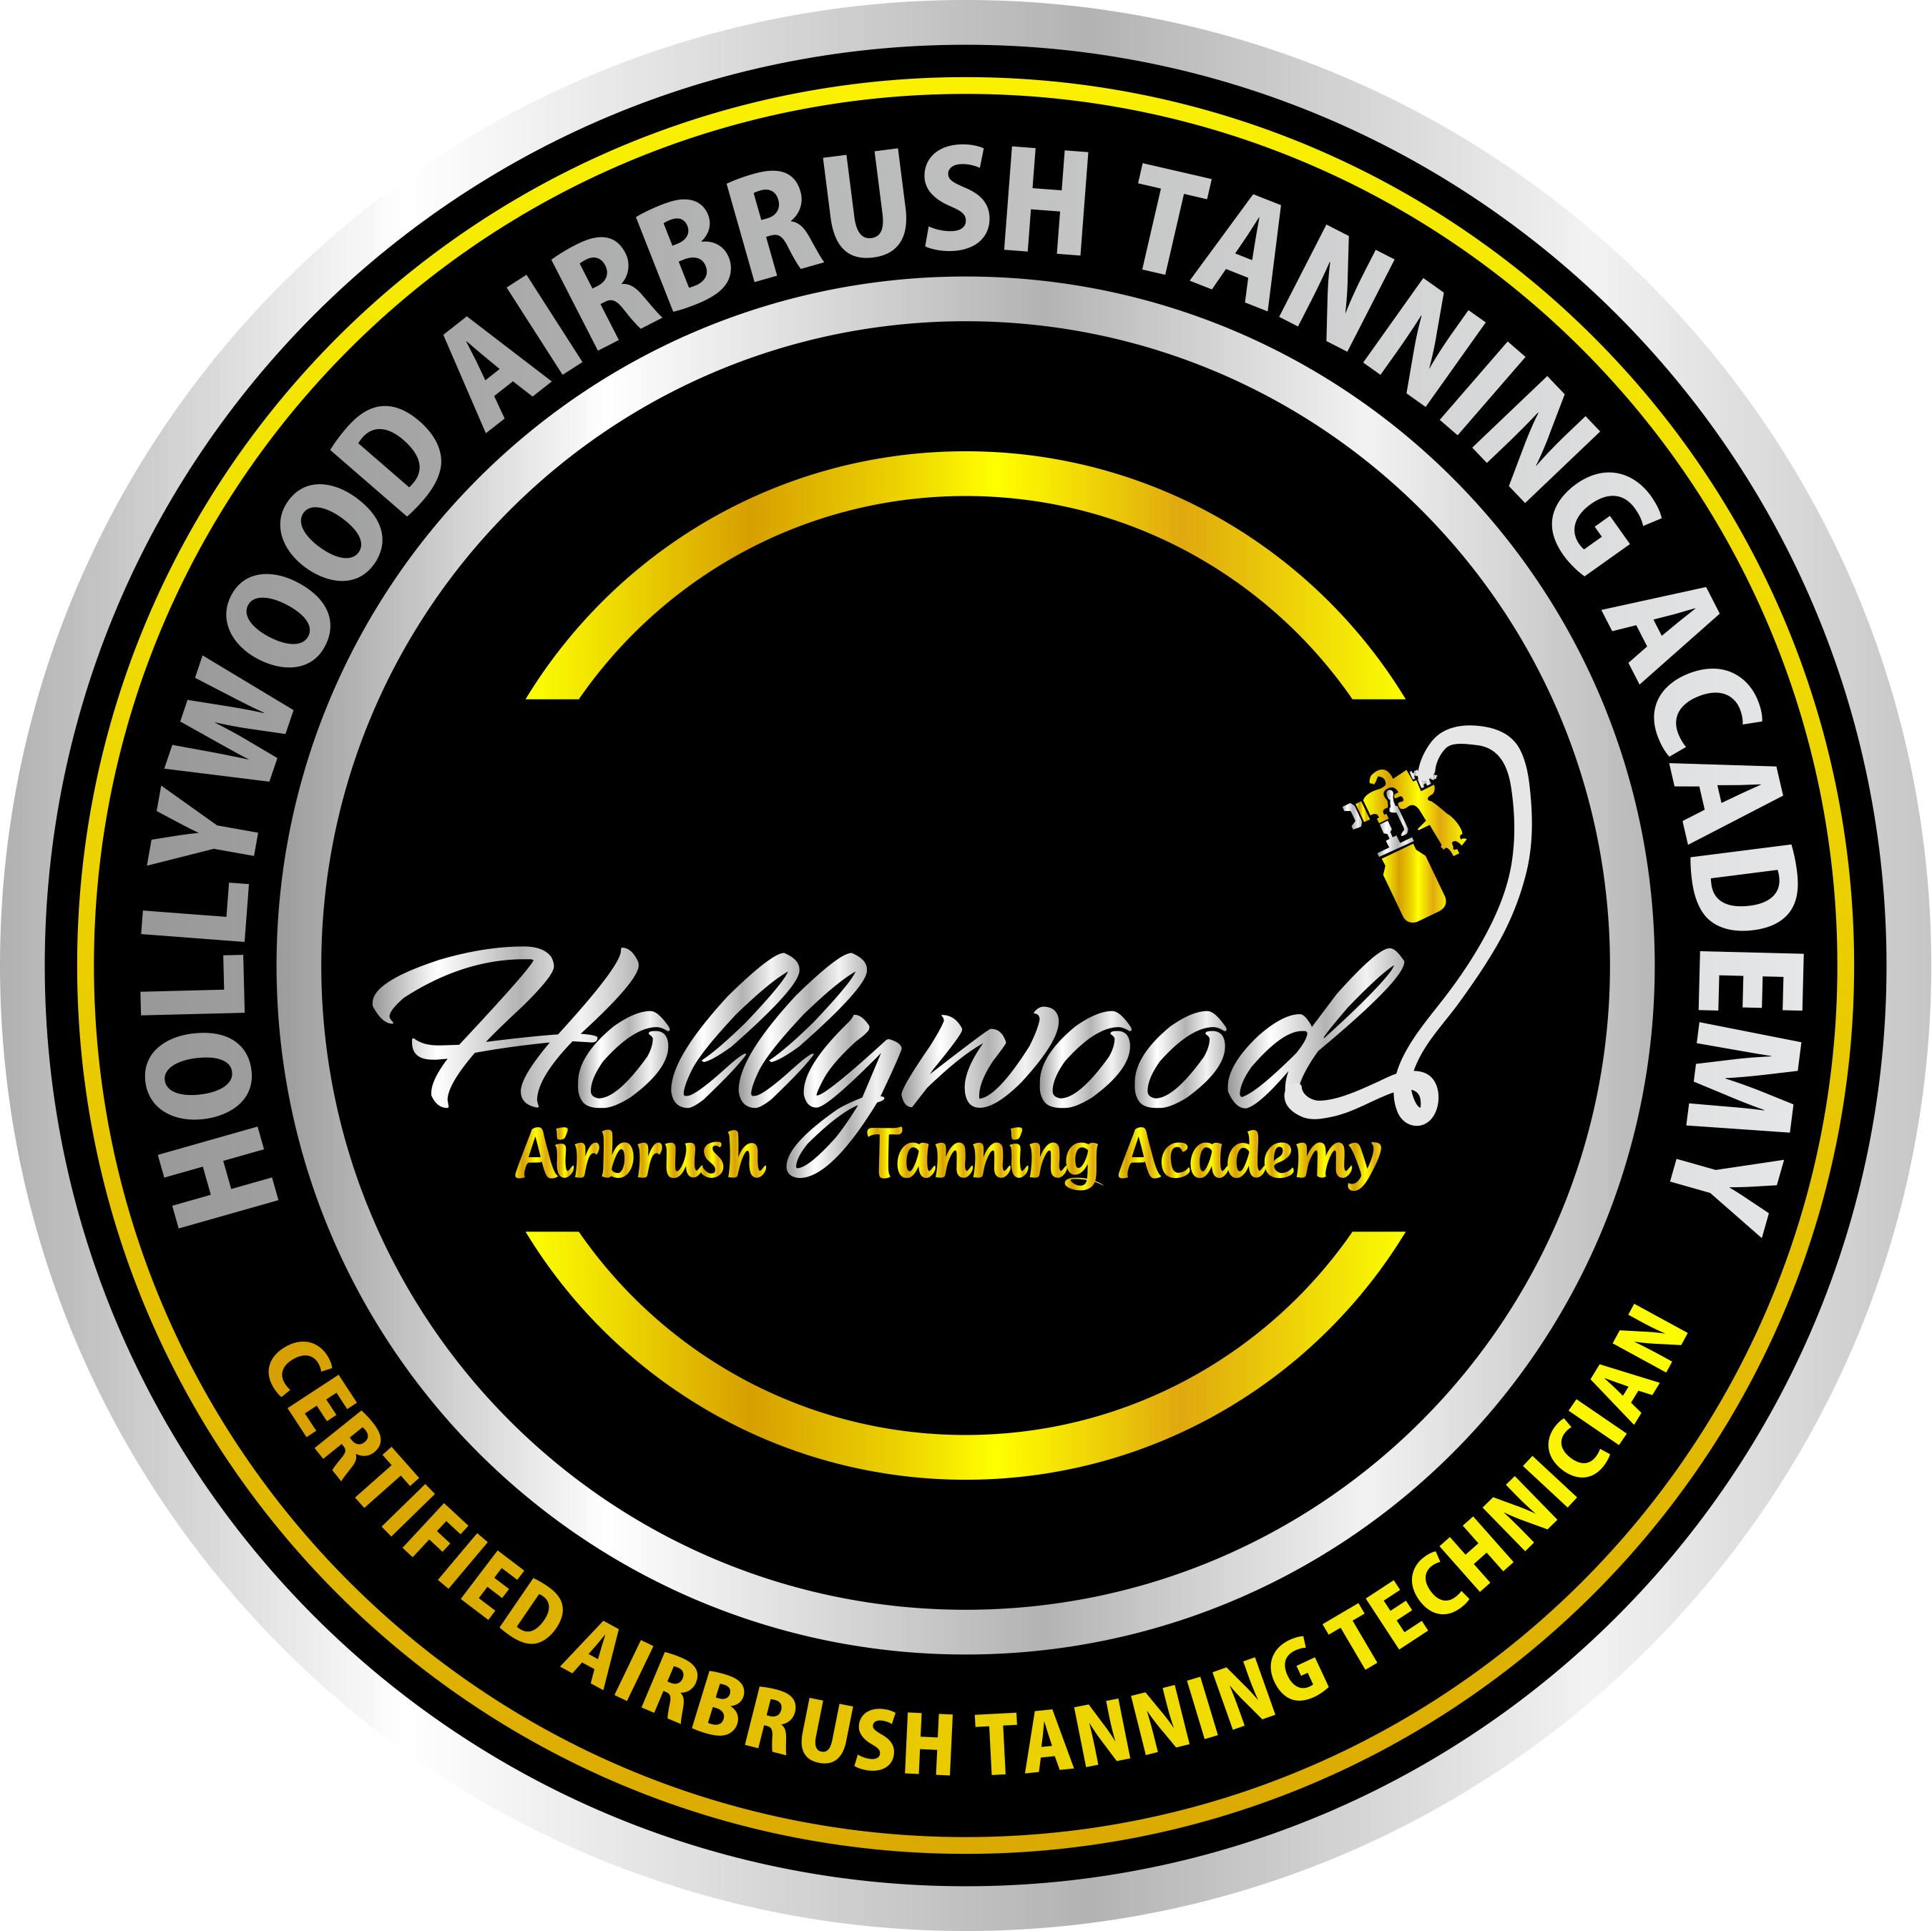 Hollywood Airbrush Tanning Academy Launches Their New Mobile Friendly Website